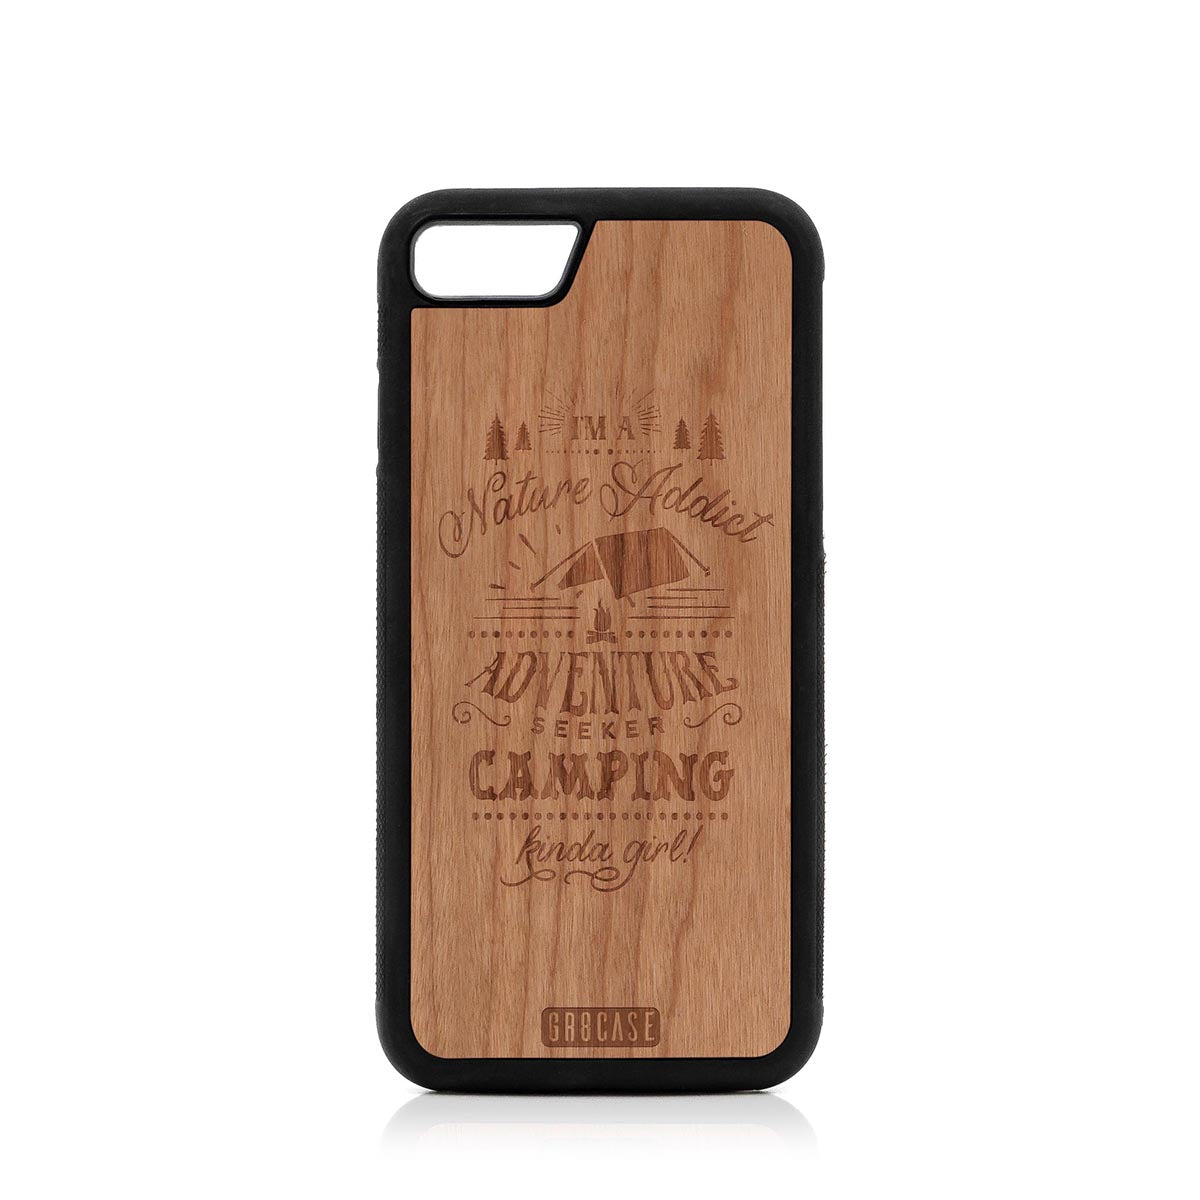 I'm A Nature Addict Adventure Seeker Camping Kinda Girl Design Wood Case For iPhone 7/8 by GR8CASE